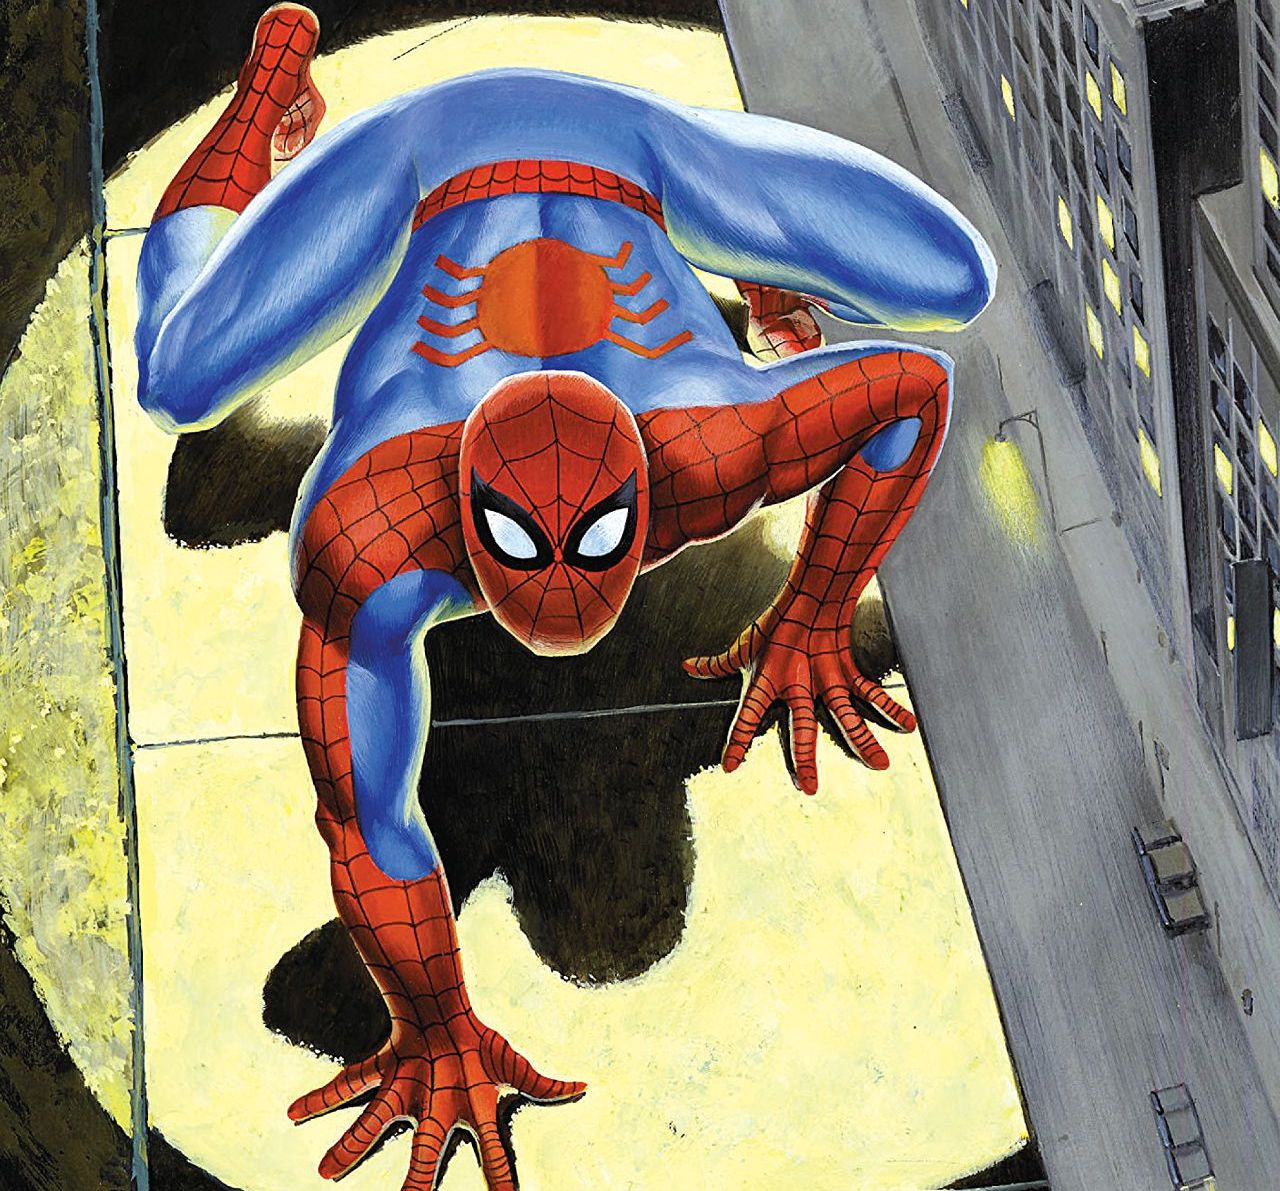 Spectacular Spider-Man: Lo, This Monster Review